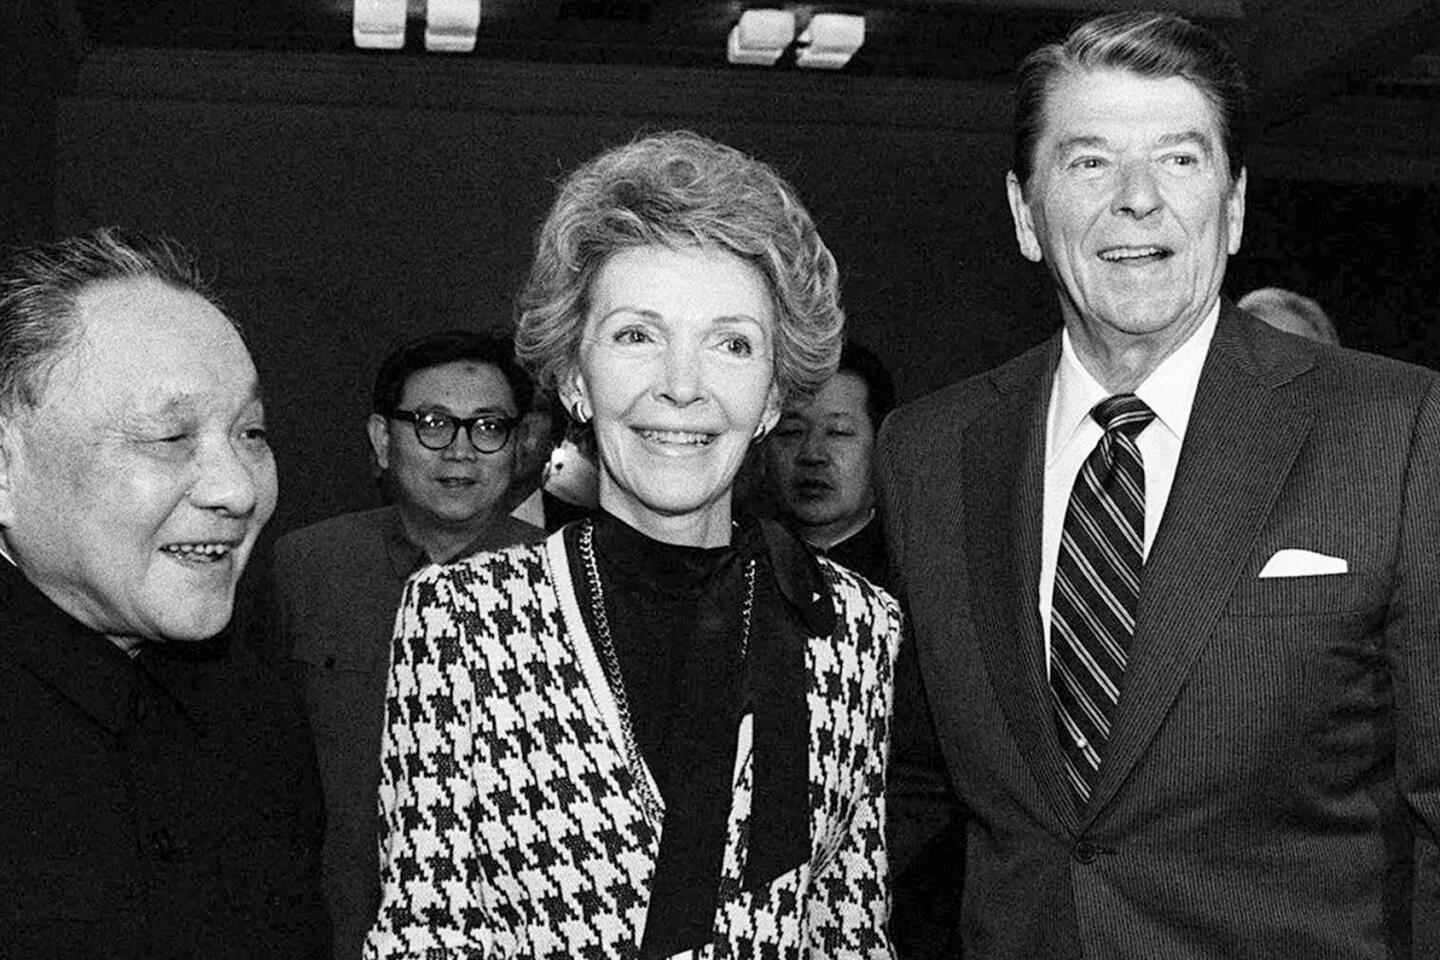 Nancy Reagan holds Chinese leader Deng Xiaoping's hand during a 1984 visit to Beijing. The first lady took an active role in advising President Reagan on policy matters.